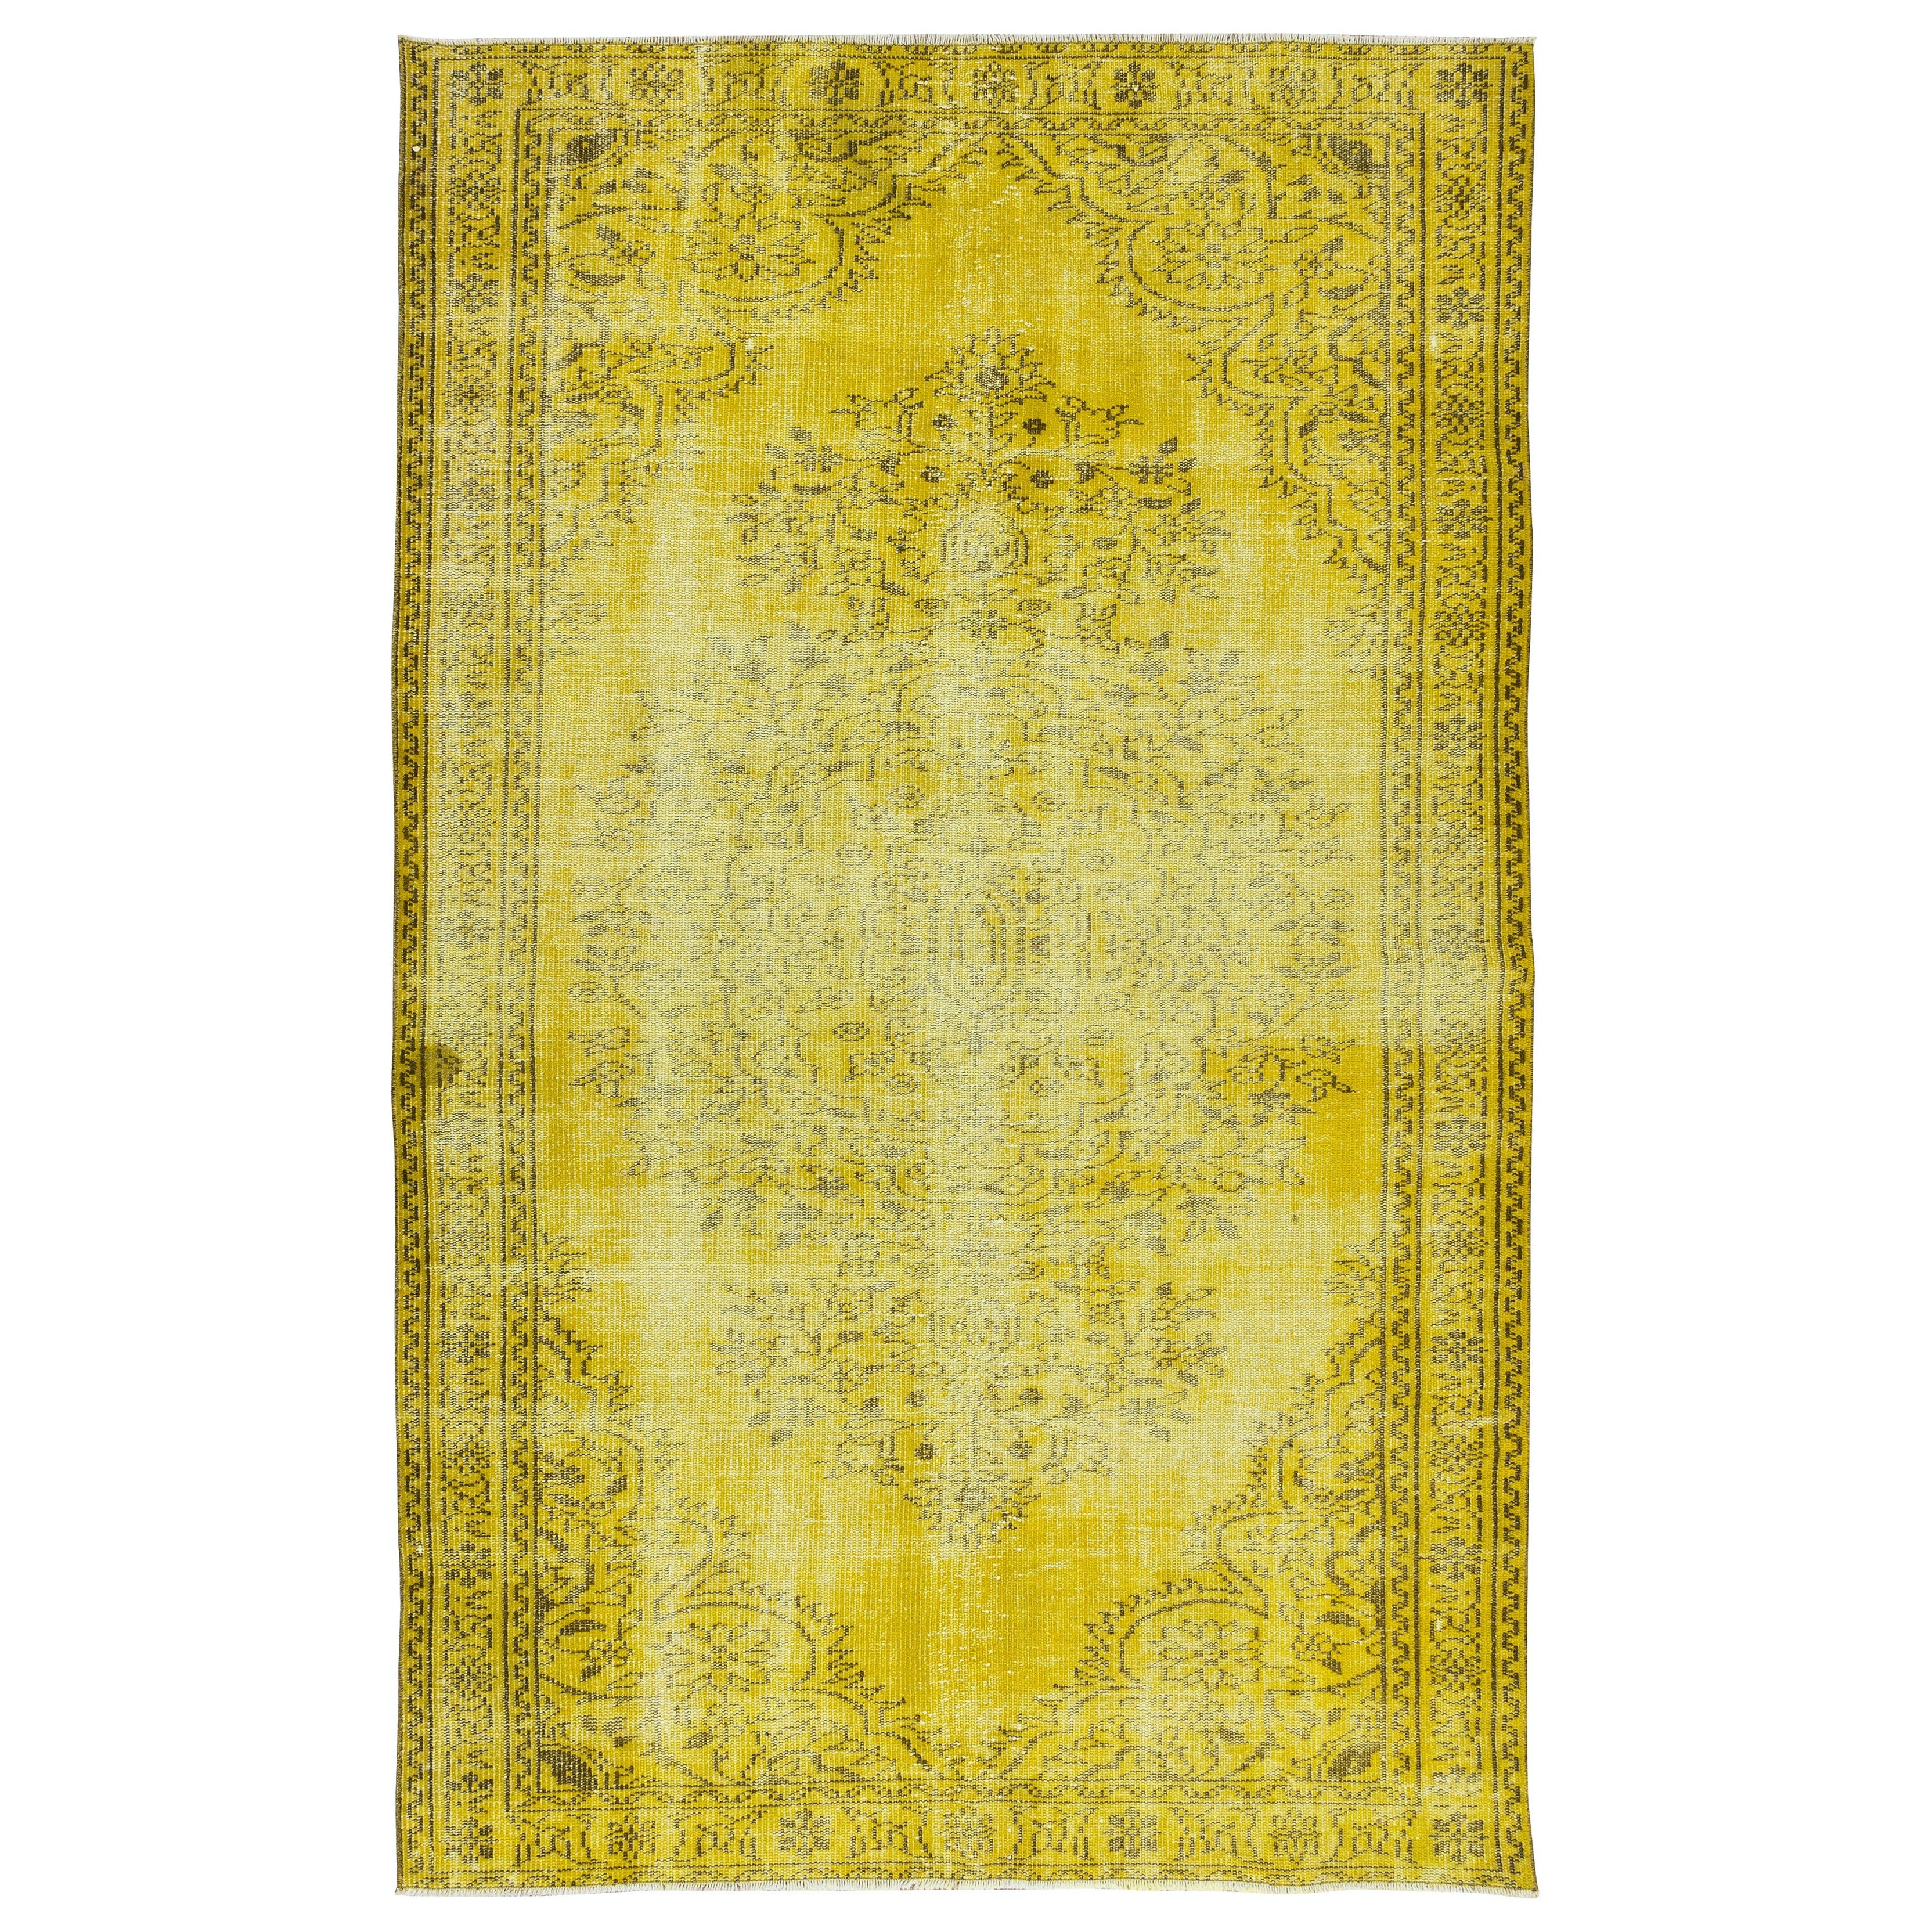 5.4x8.7 Ft Handmade Turkish Rug Over-Dyed in Yellow. 4 intérieurs modernes